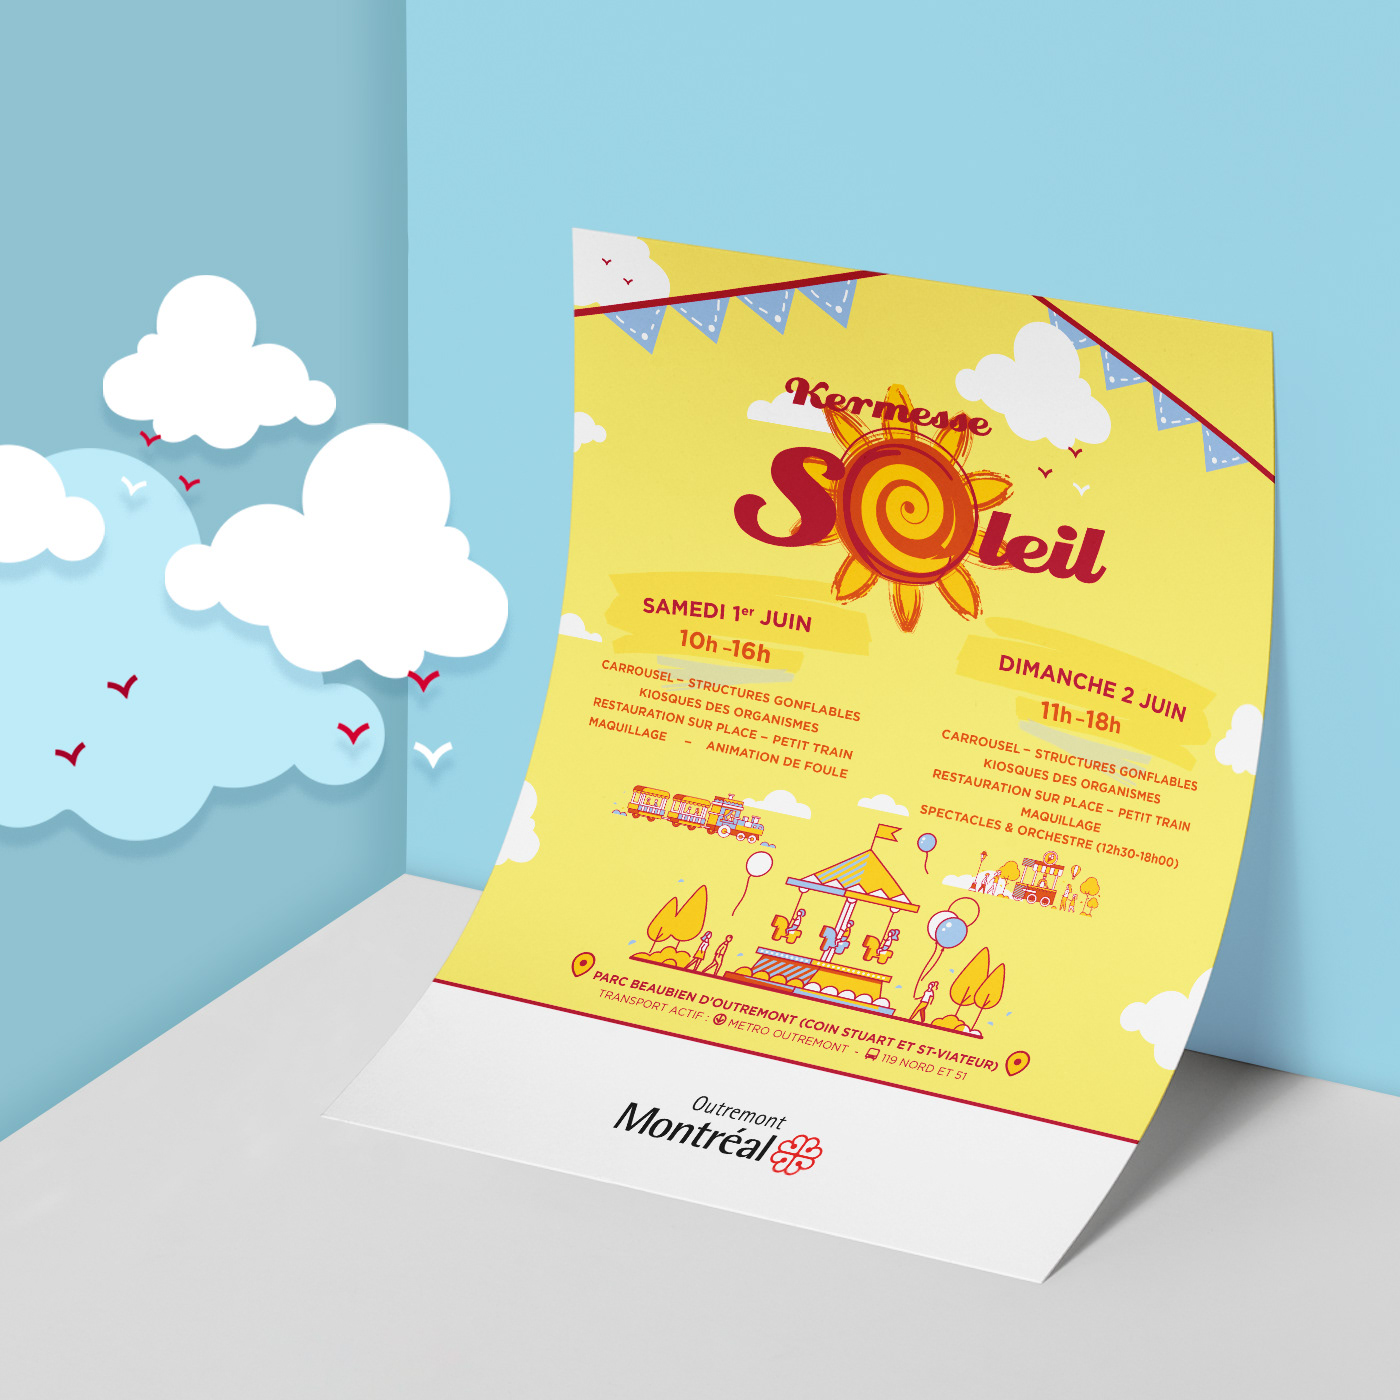 Outremont Kermesse Soleil banners flyers Event programmation icons